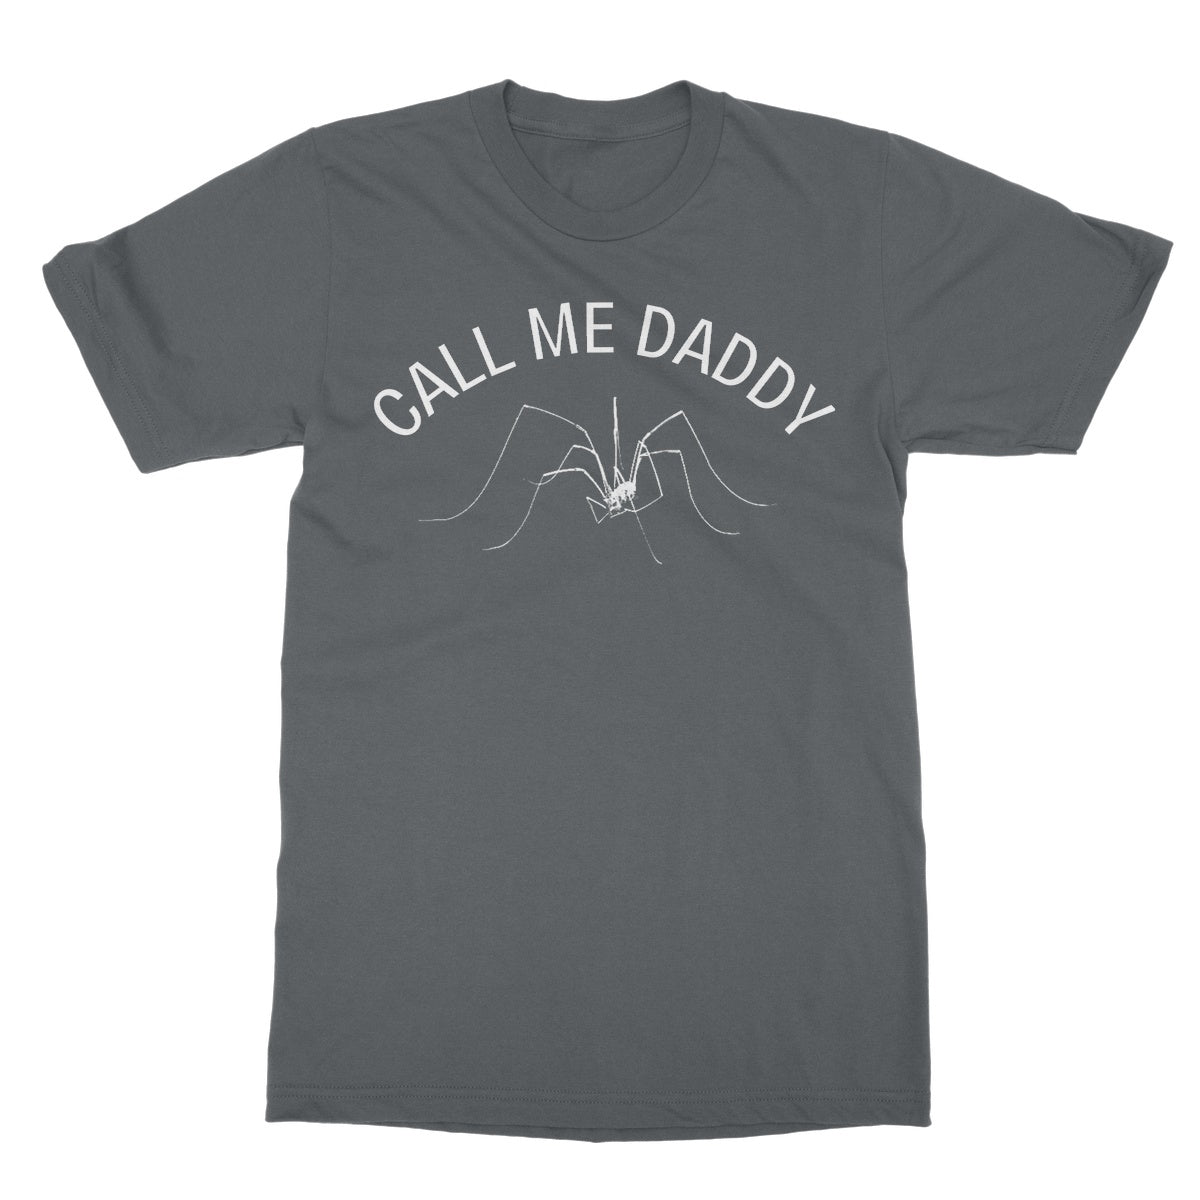 call me daddy t shirt green